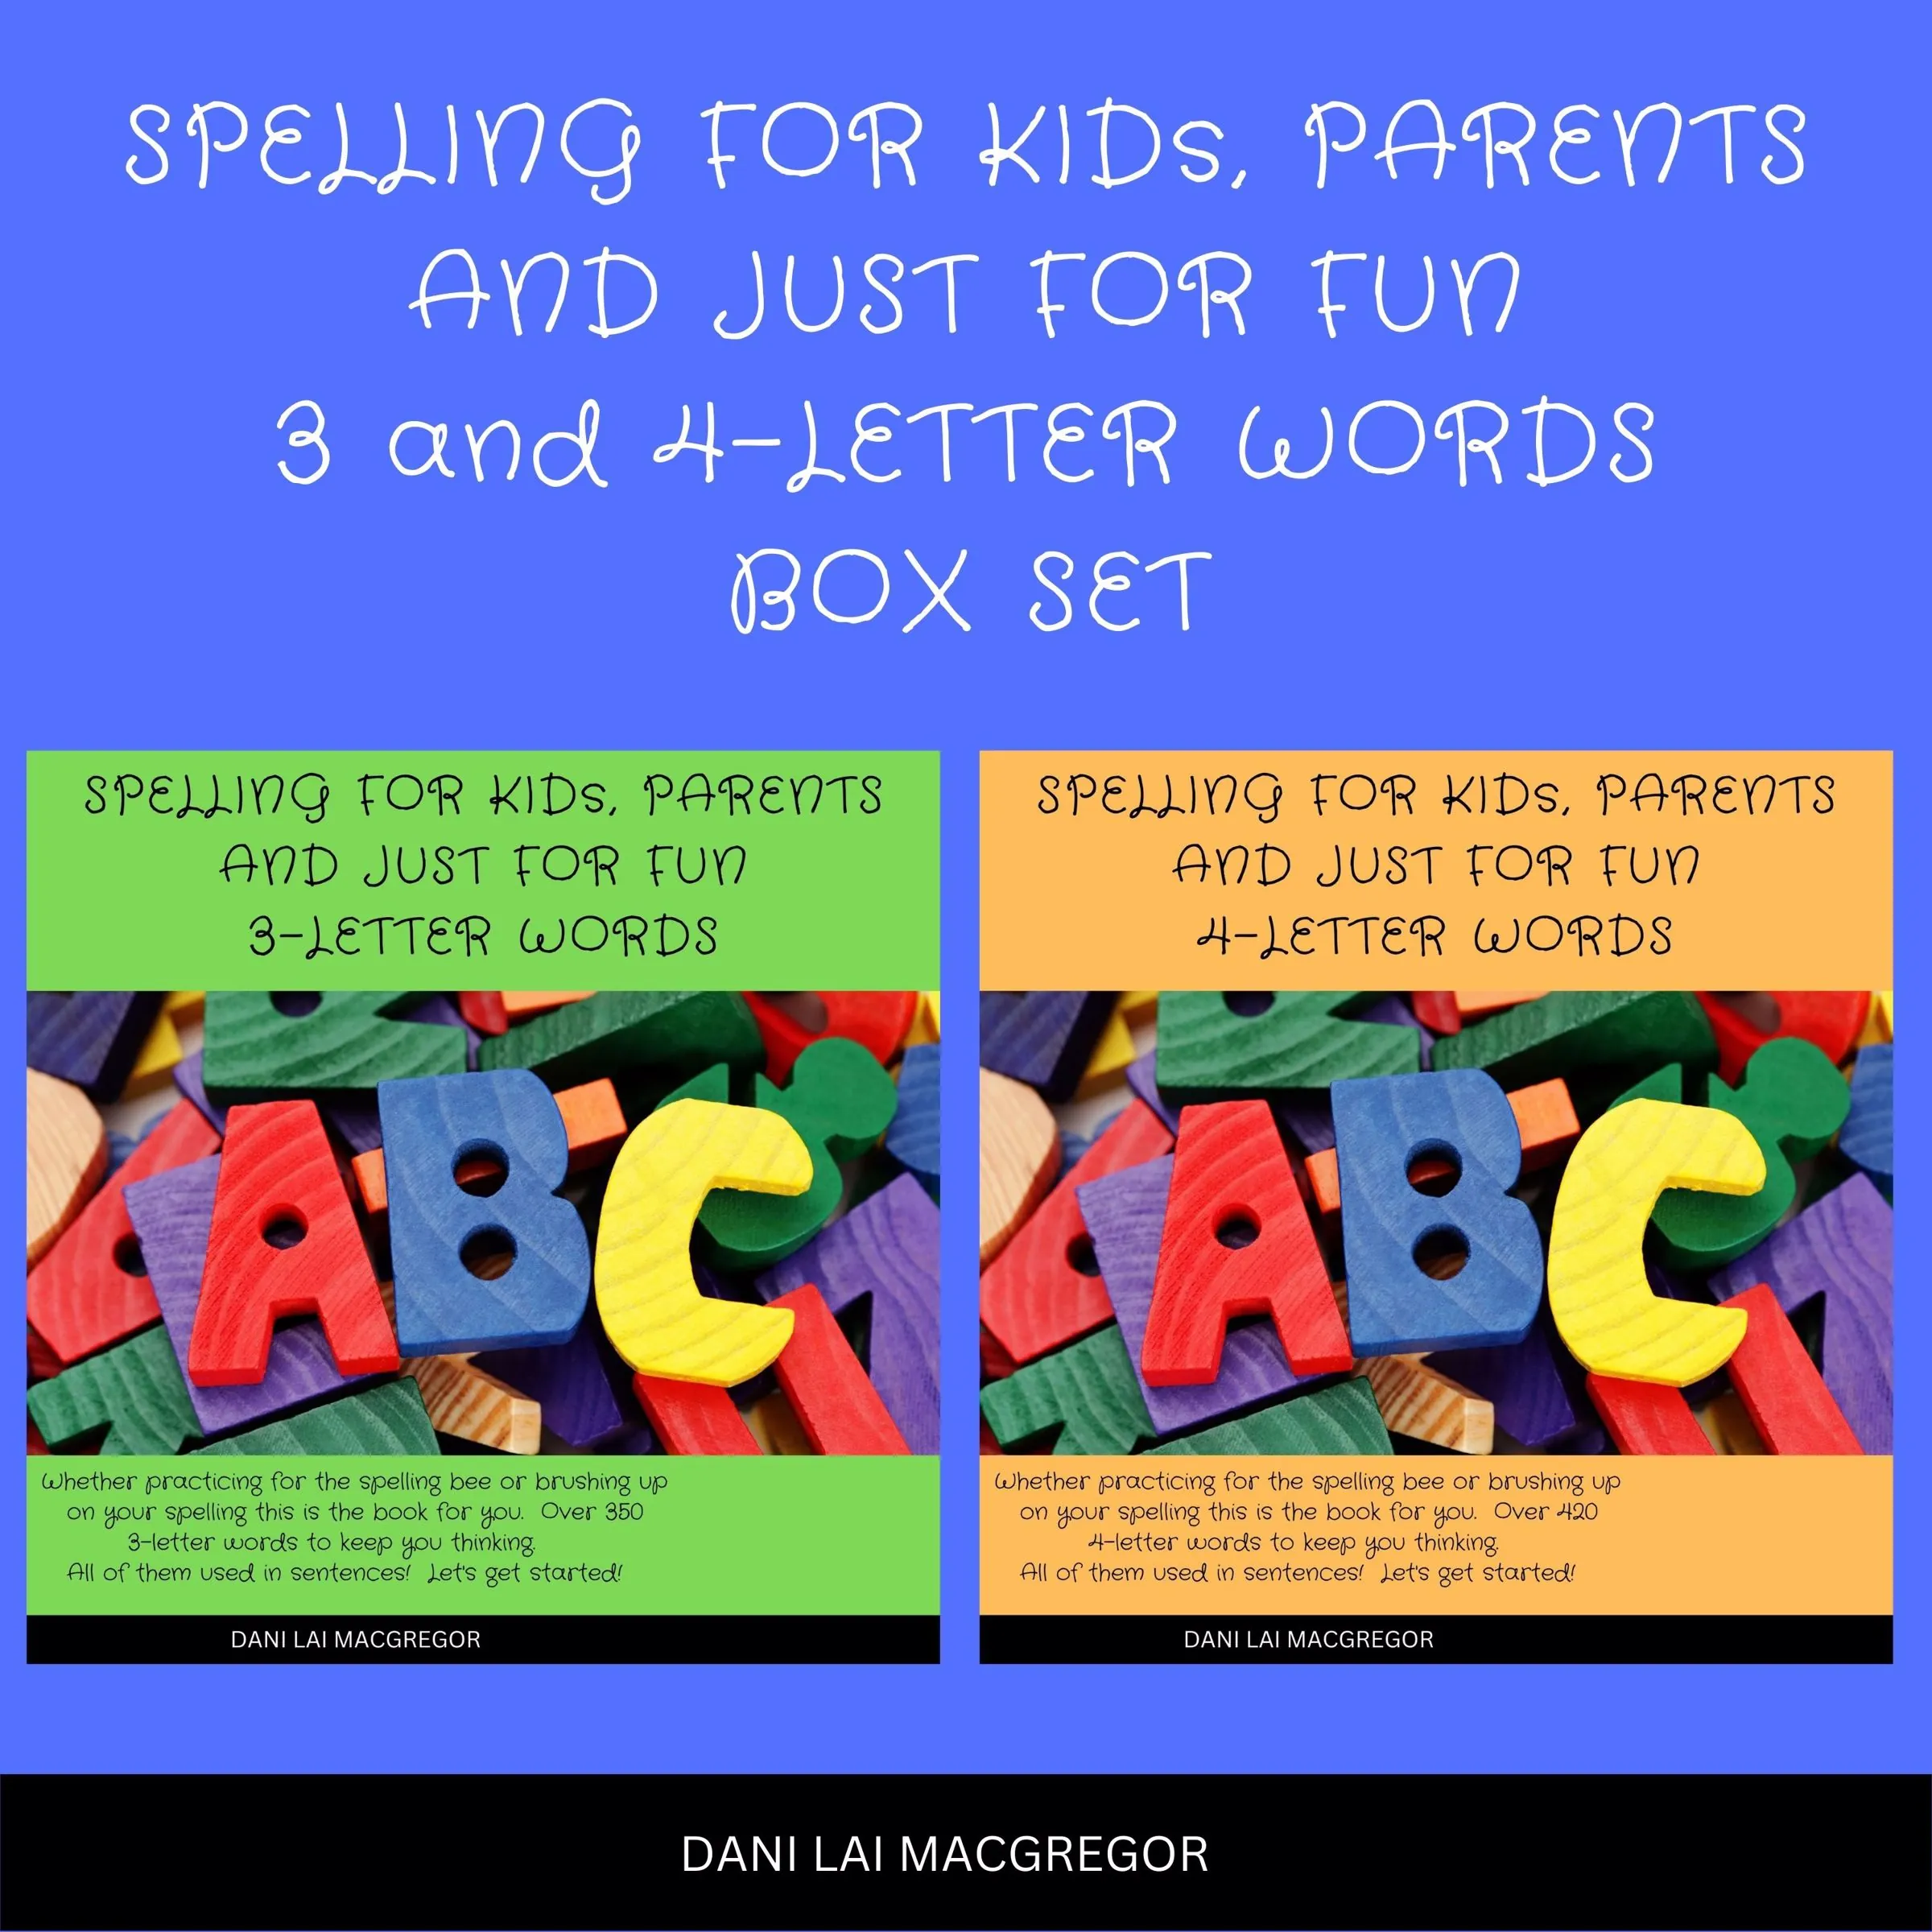 Spelling for Kids, Parents and Just for Fun 3 and 4 - Letter Words Box Set Audiobook by Dani Lai MacGregor